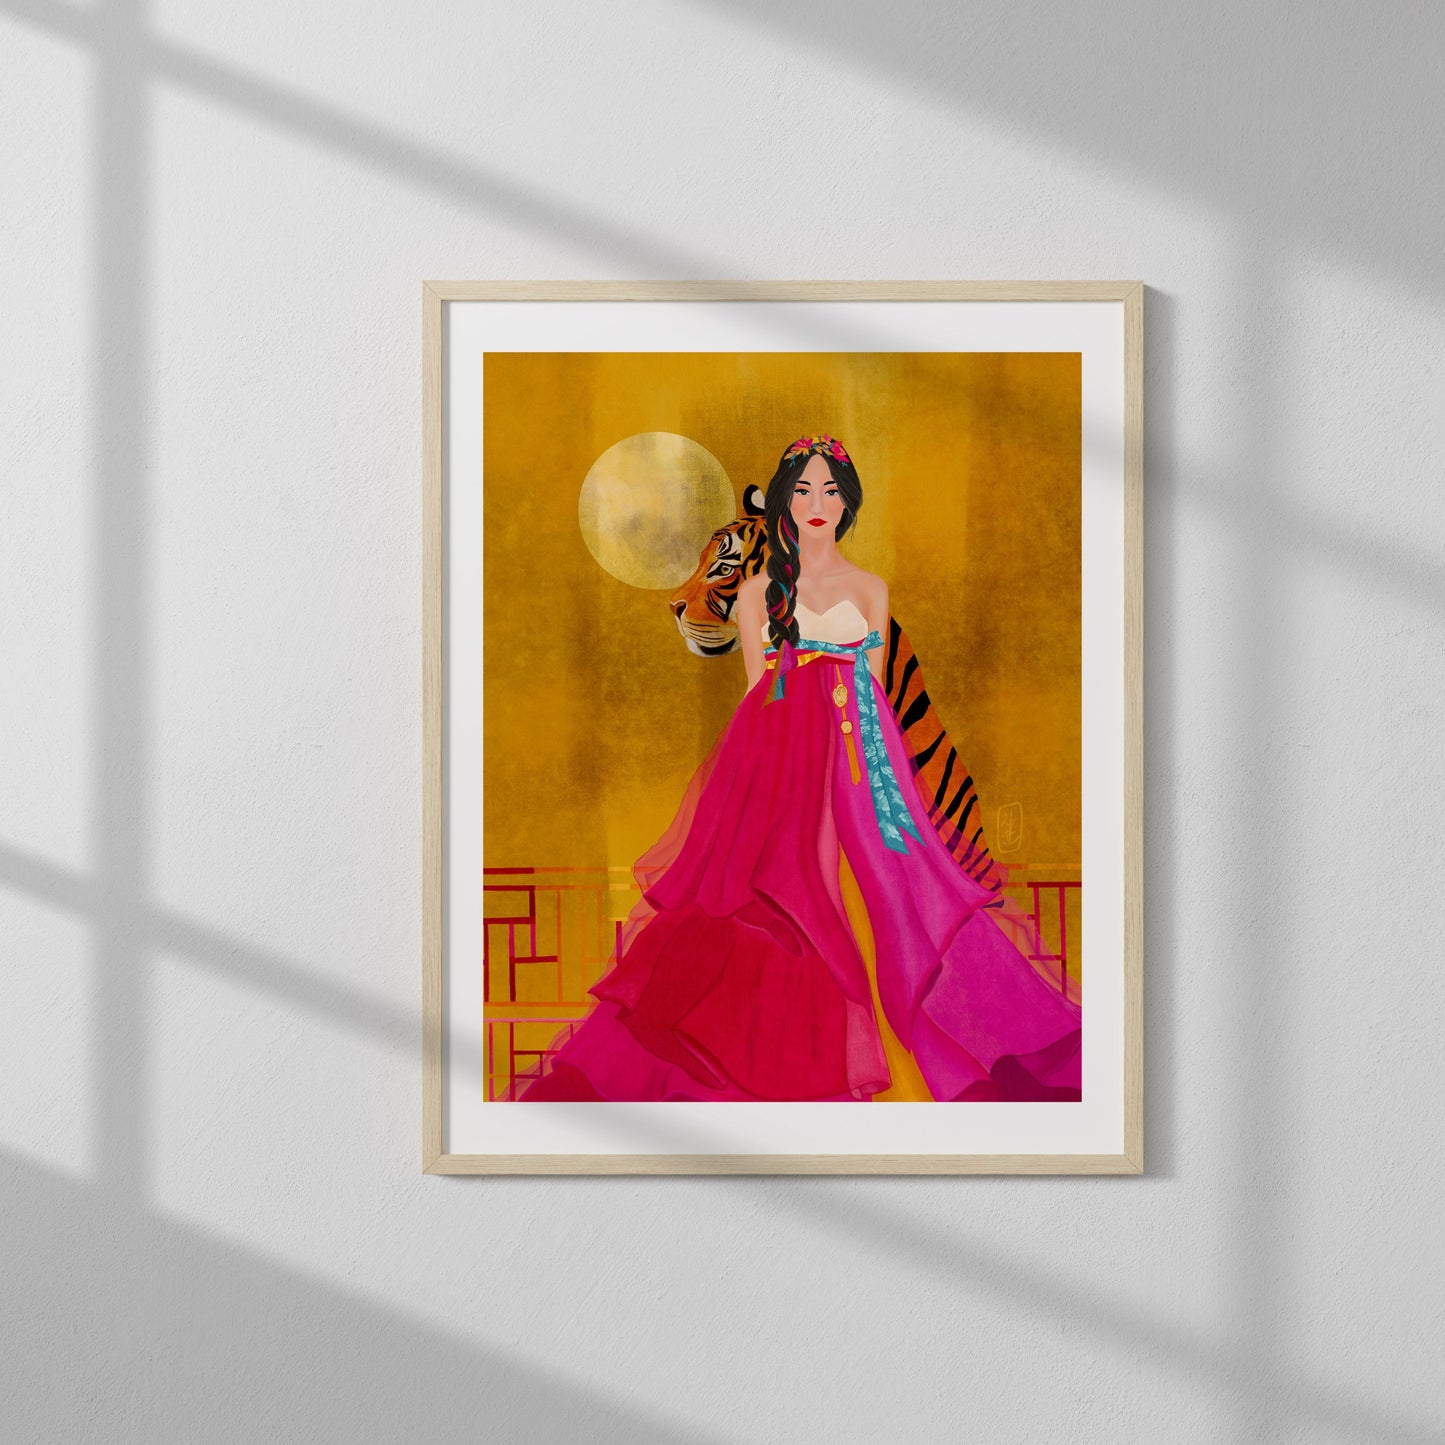 Modern Hanbok Art Print showcased in a light wooden frame with a shadow backdrop